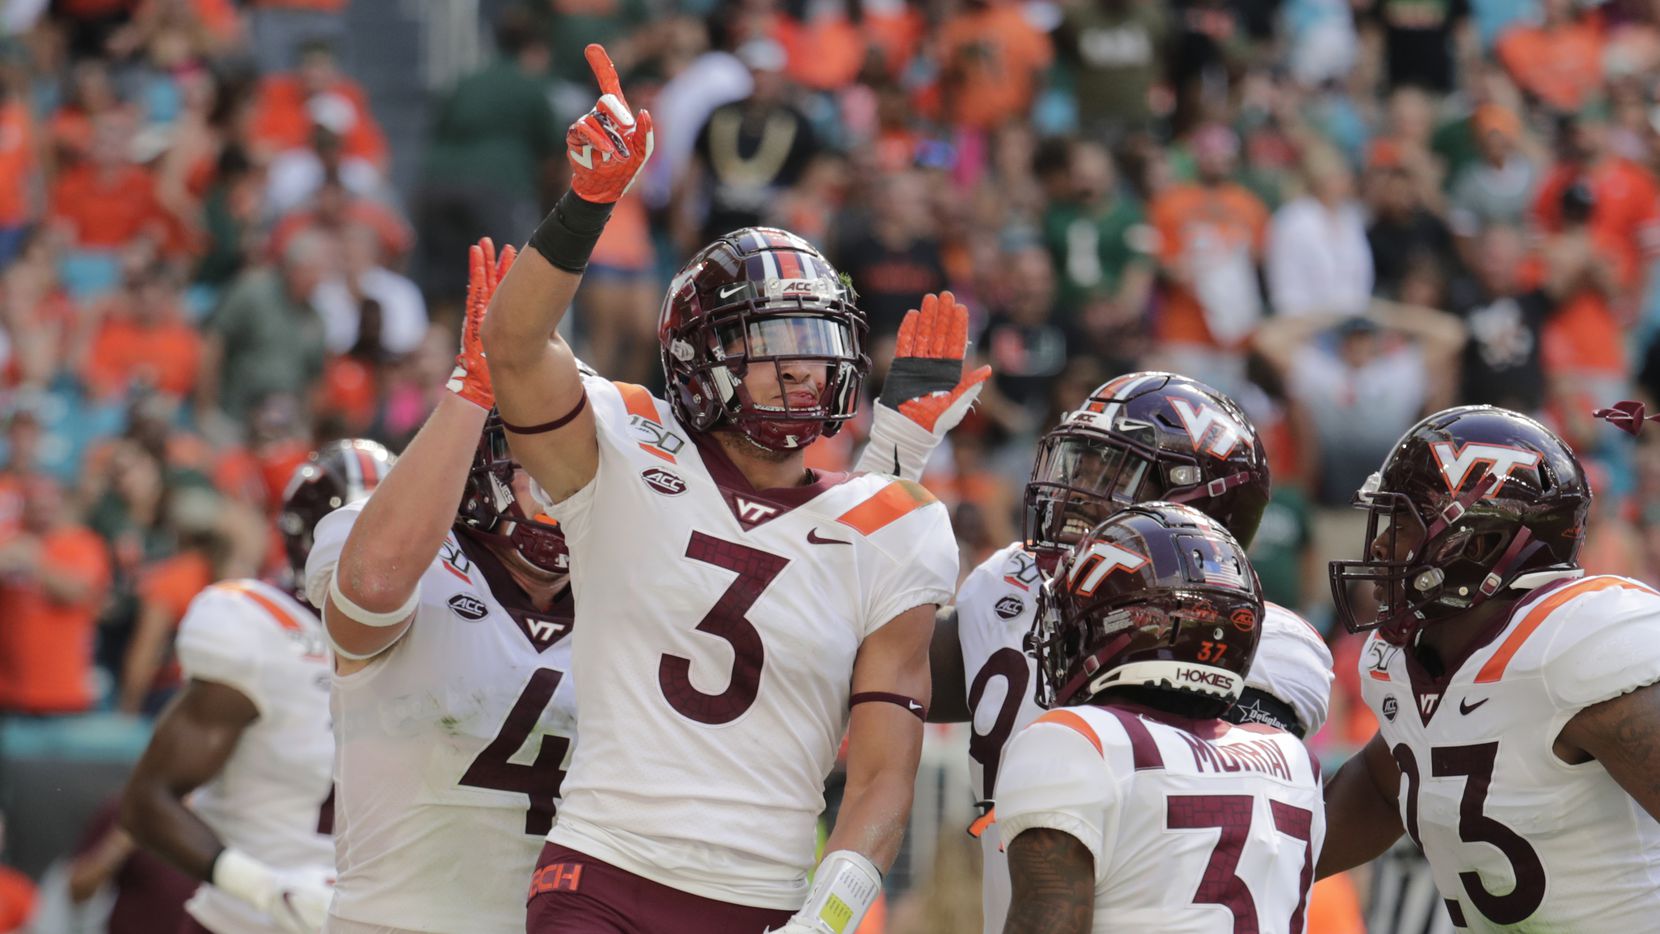 In this Oct. 5, 2019, file photo, Virginia Tech defensive back Caleb Farley (3) celebrates after intercepting a pass during the first half of the team's NCAA college football game against Miami in Miami Gardens, Fla.